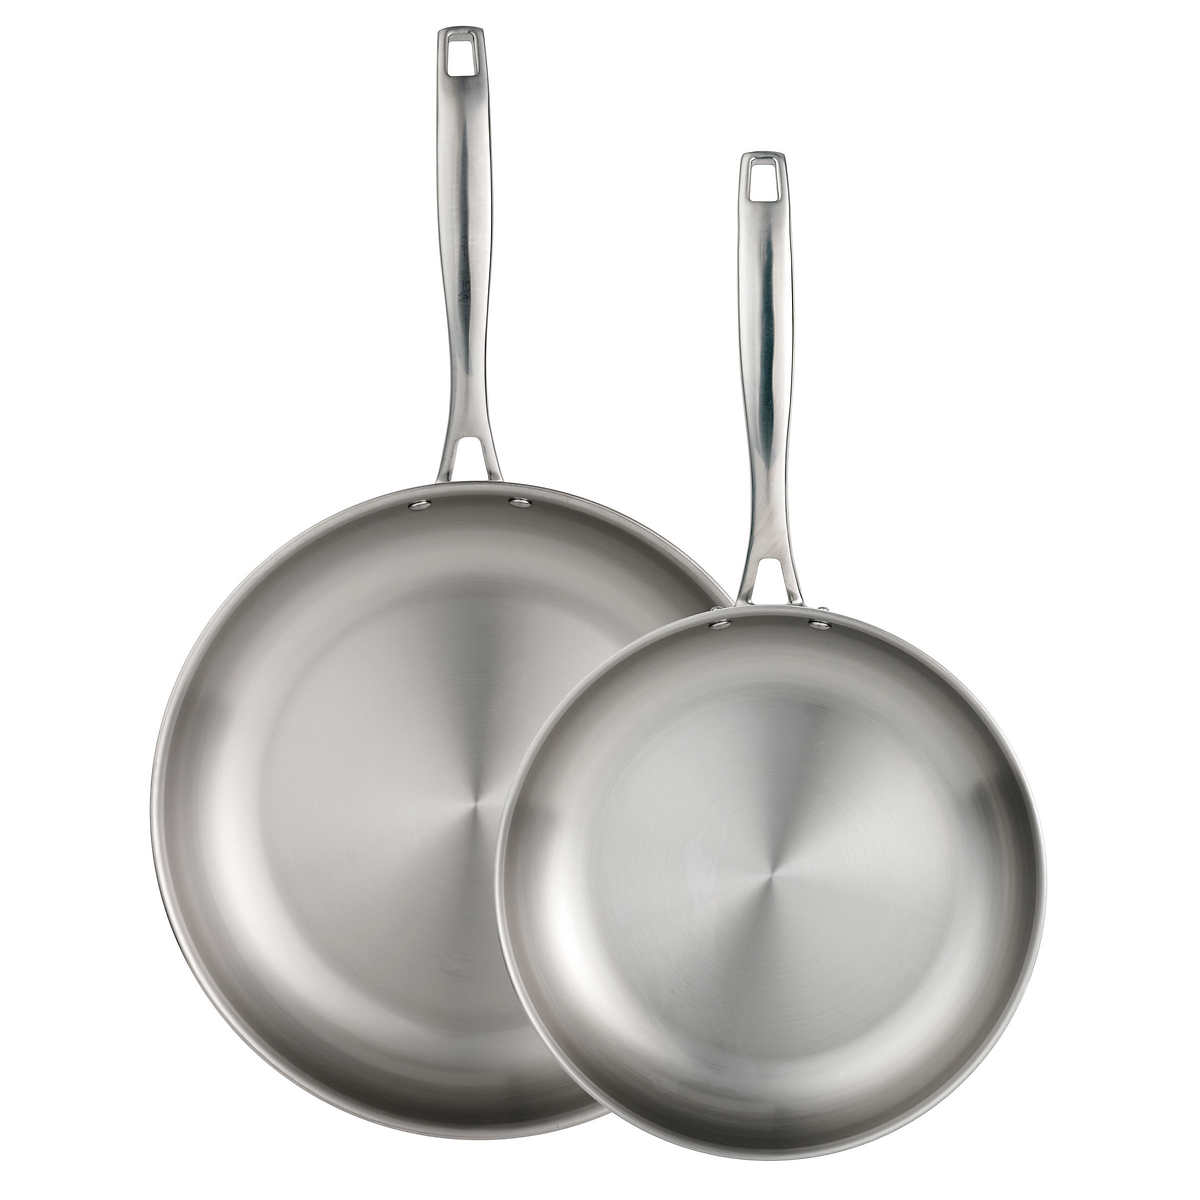 Tramontina Tri-Ply Clad Stainless Steel Fry Pan Set, 2-piece